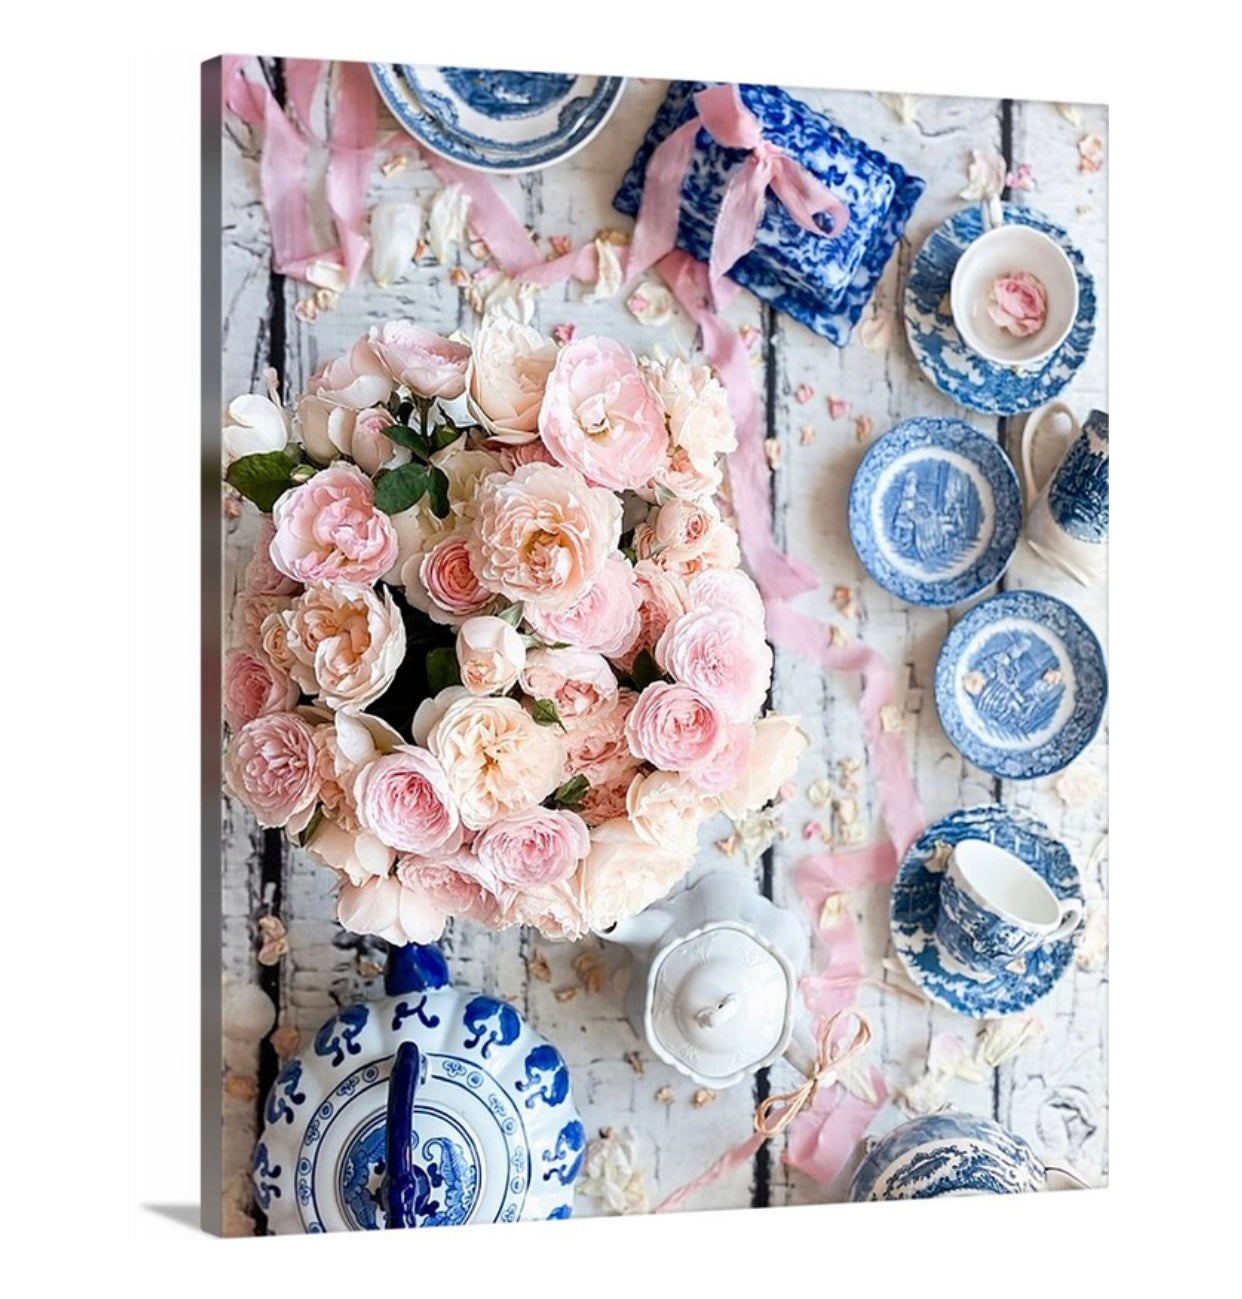 Blush Roses and Chinoiserie Gallery Wrapped Canvas